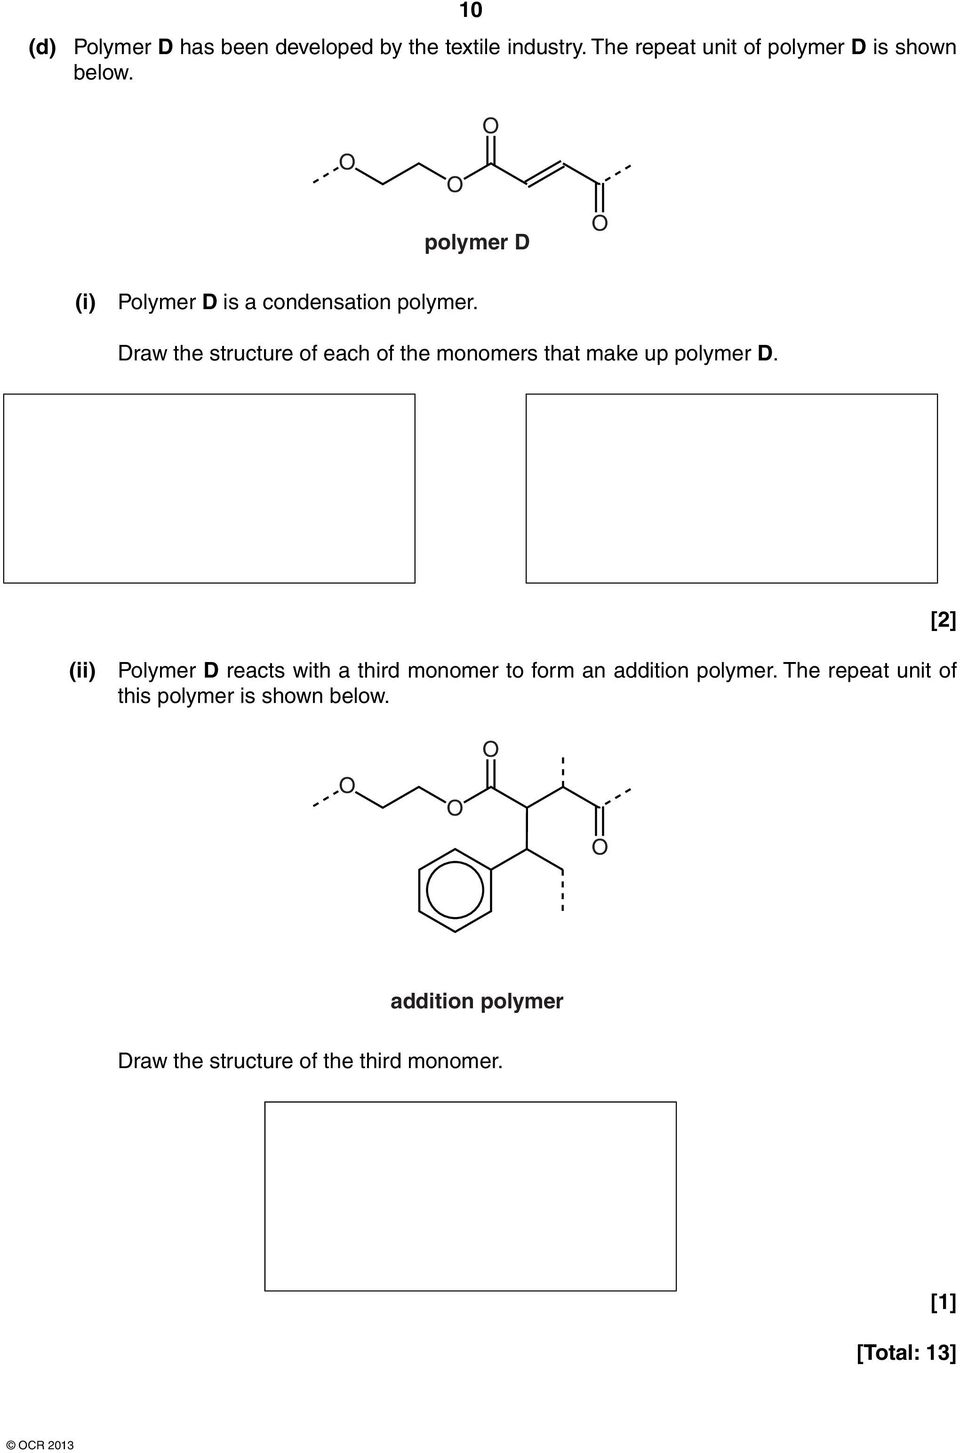 Draw the structure of each of the monomers that make up polymer D.